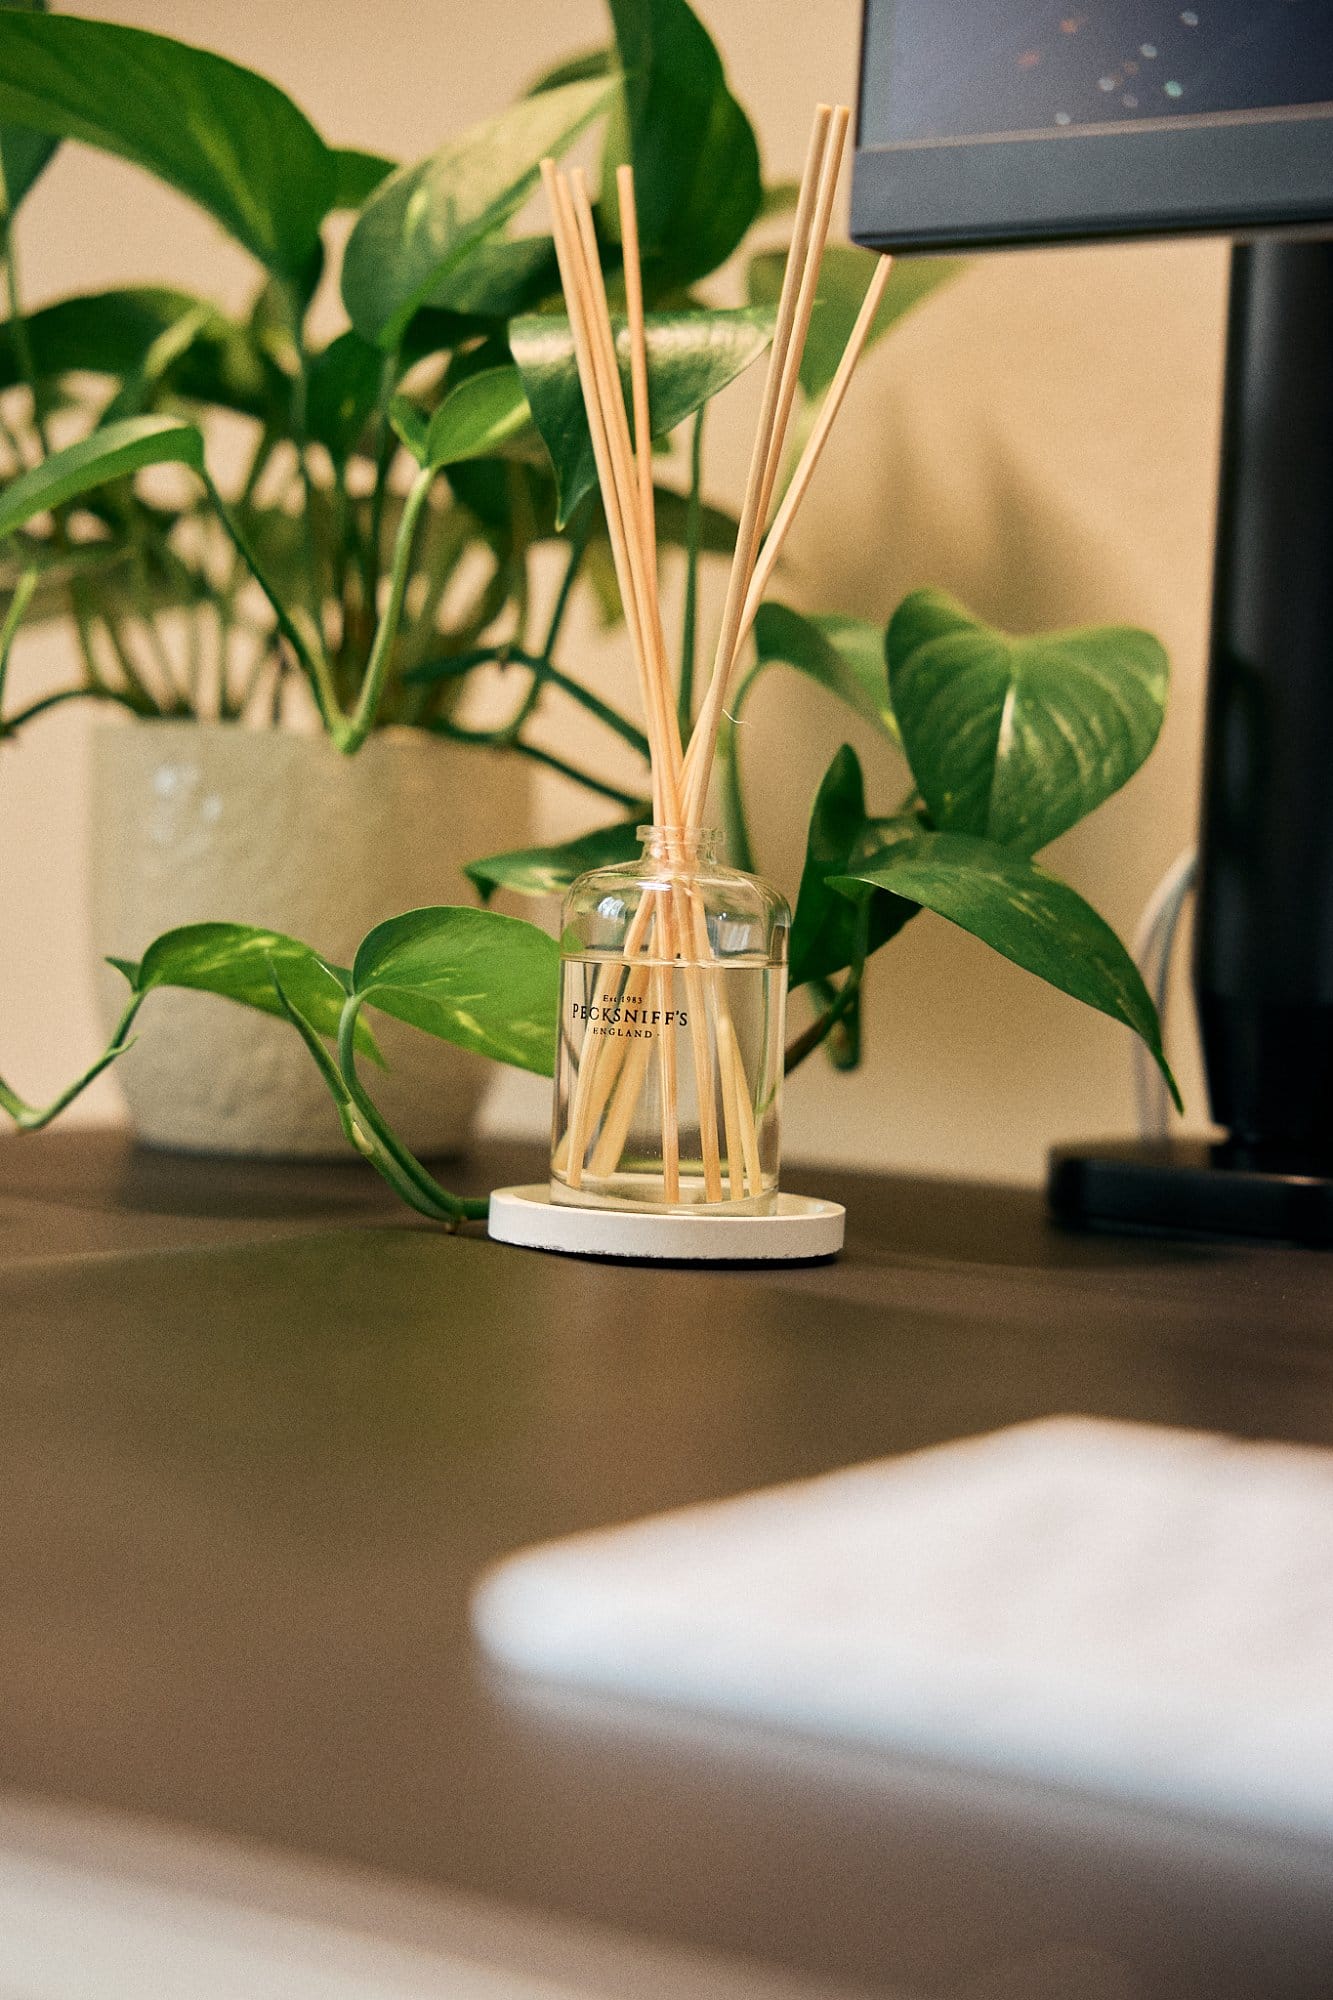 A close-up view of a reed diffuser on a desk, with a clear liquid and wooden sticks, set against a backdrop of lush green potted plants and a computer monitor